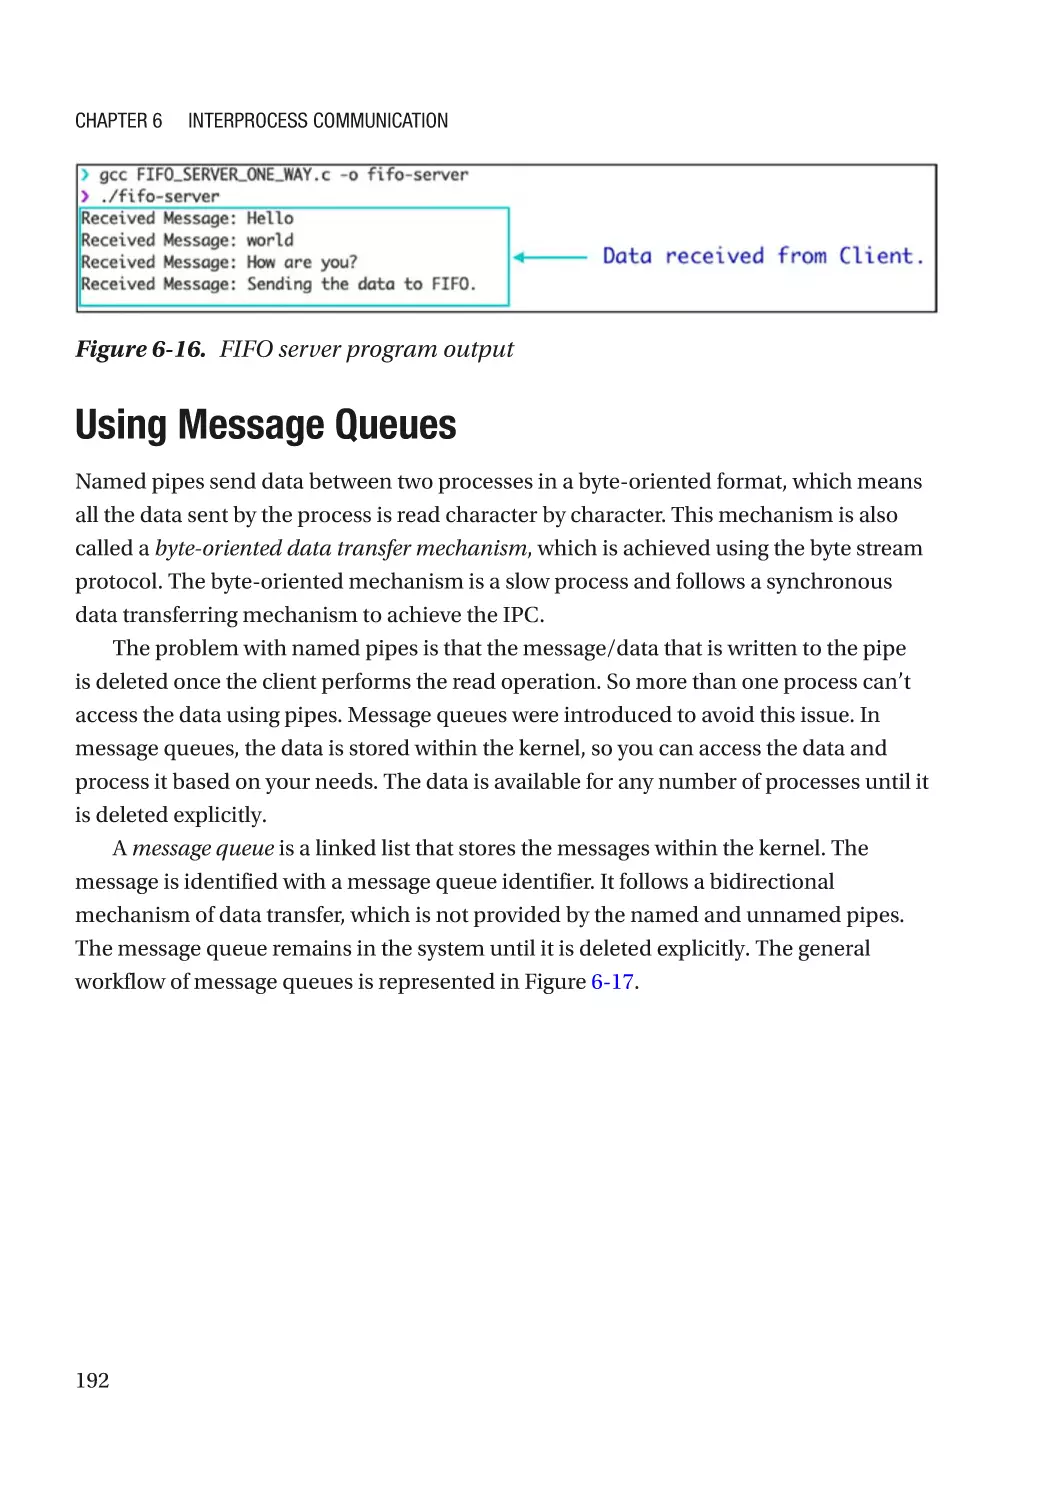 Using Message Queues